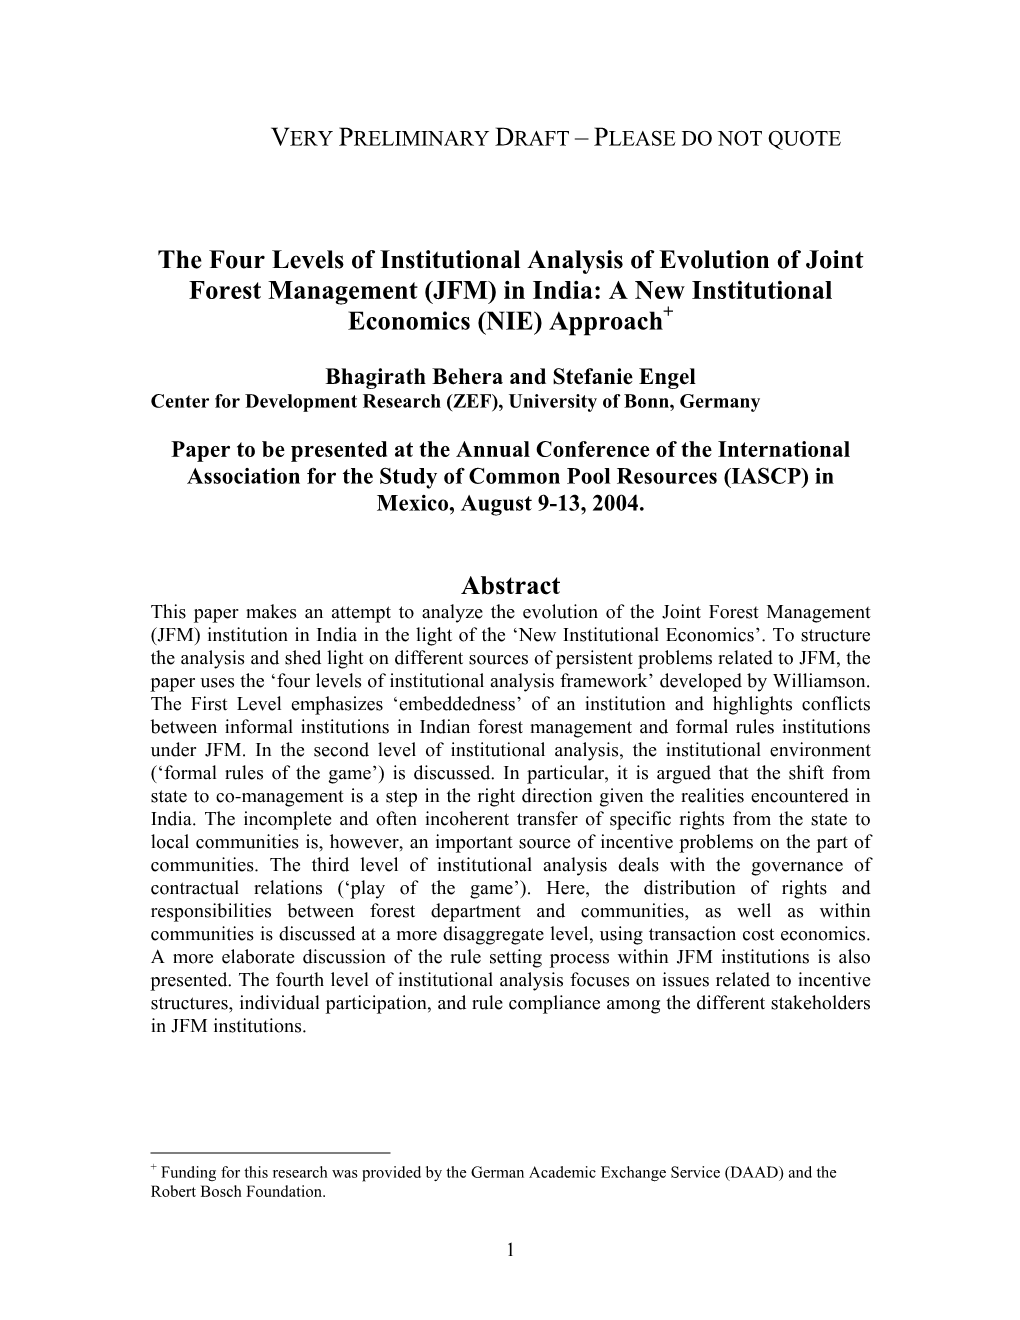 The Four Levels of Institutional Analysis of Evolution of Joint Forest Management (JFM) in India: a New Institutional Economics (NIE) Approach+